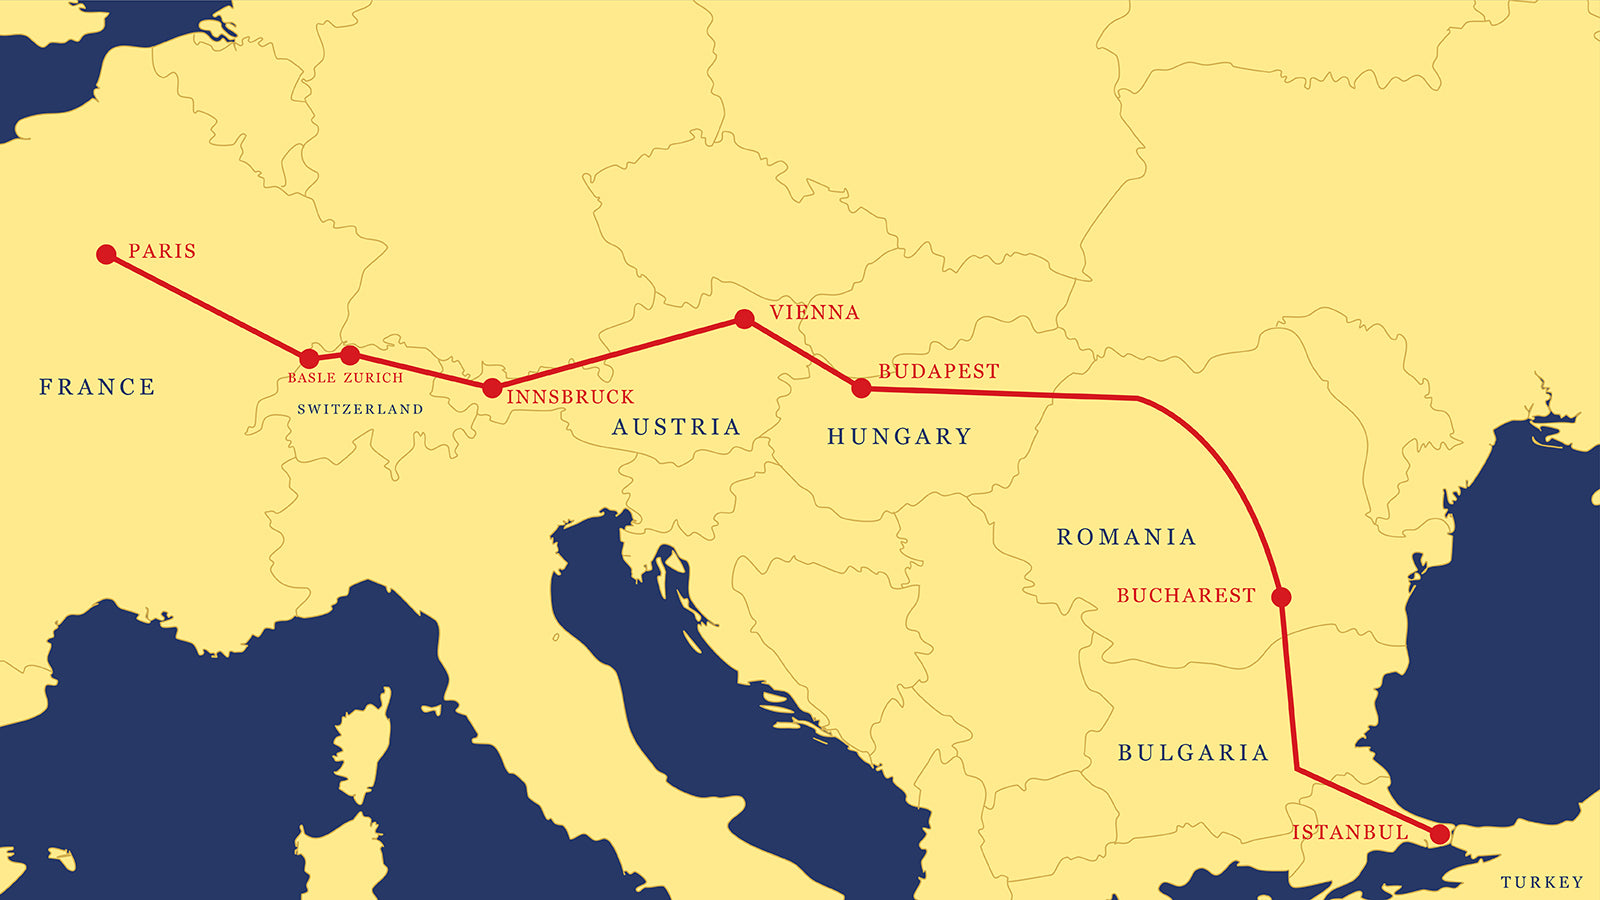 Orient Express Train Route Map